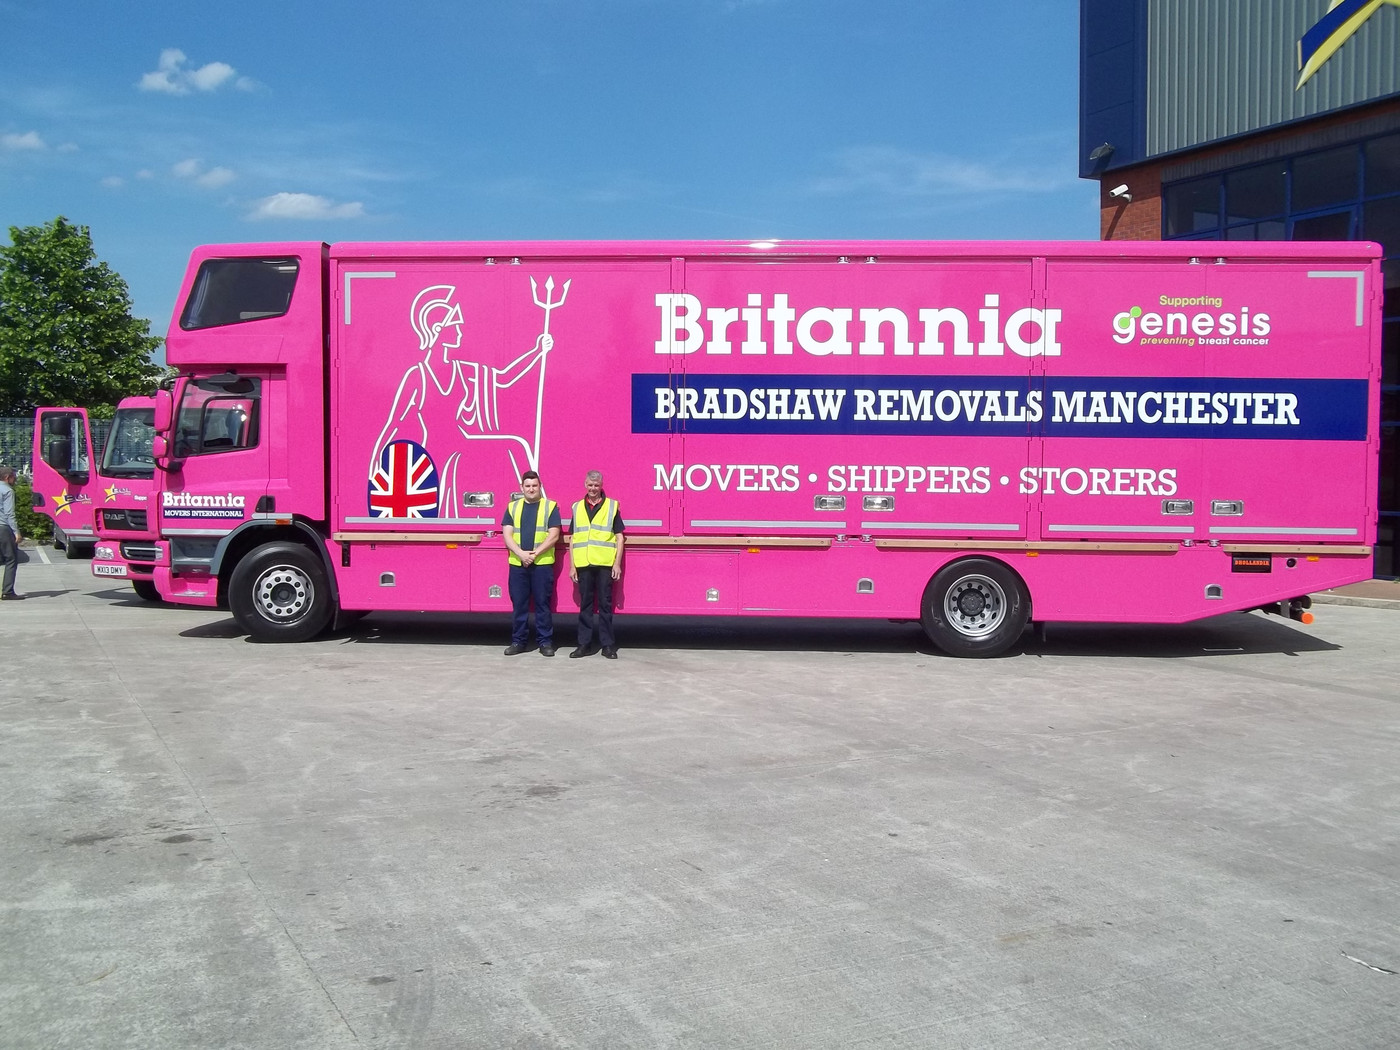 European Removals to the UK